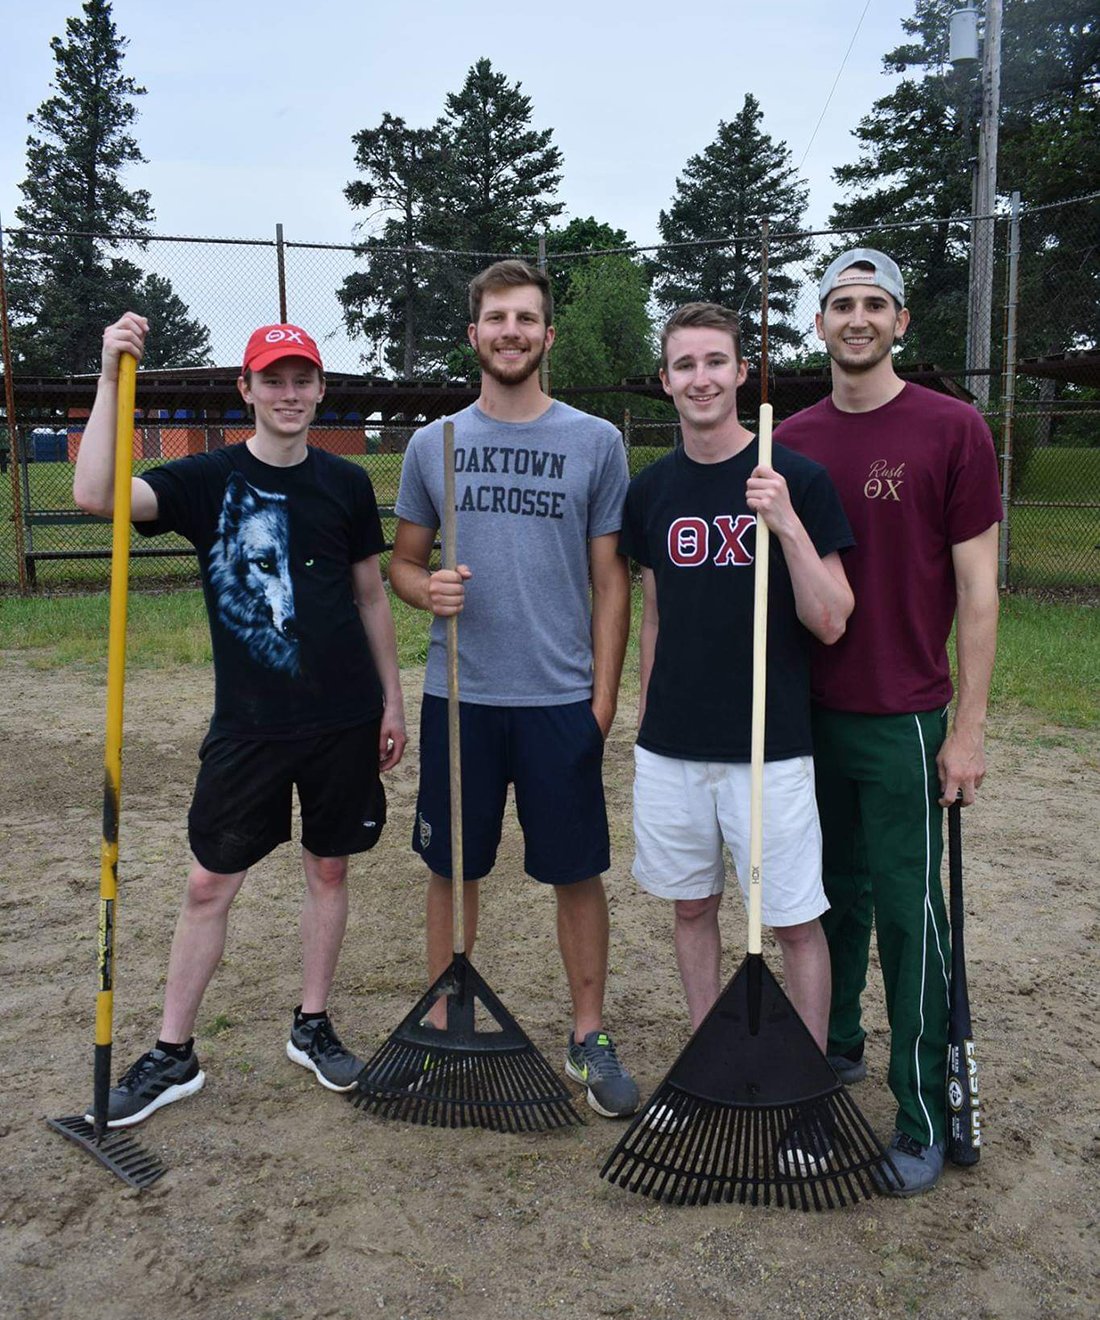 4 members of Theta Chi Fraternity with rakes in a park